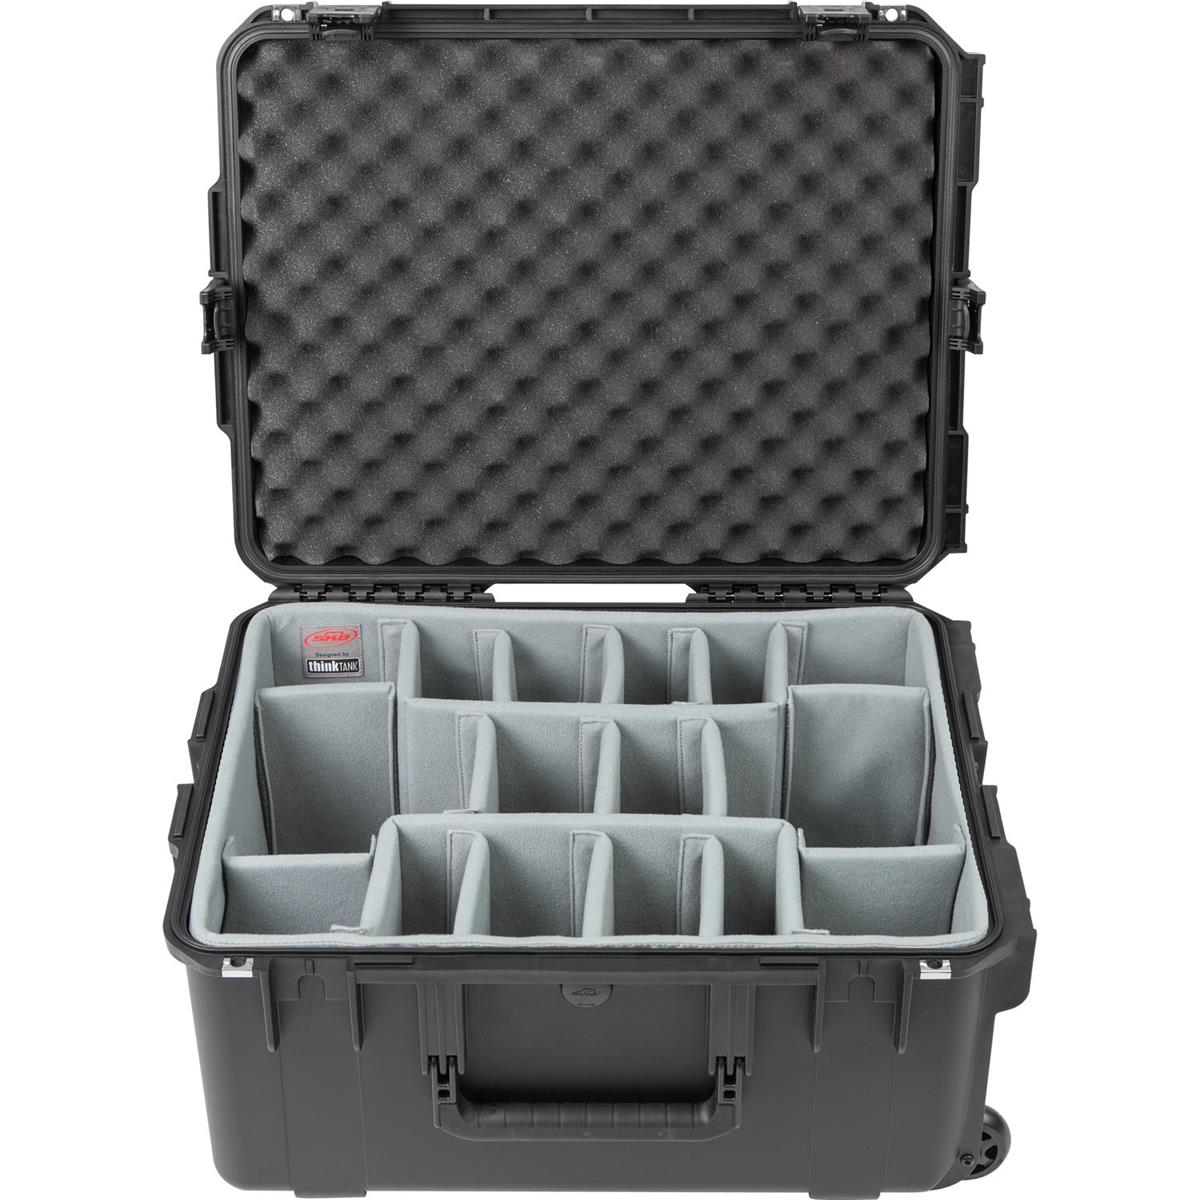 SKB iSeries 2217-10 Case with Think Tank Designed Photo Dividers & Lid Foam (Black)